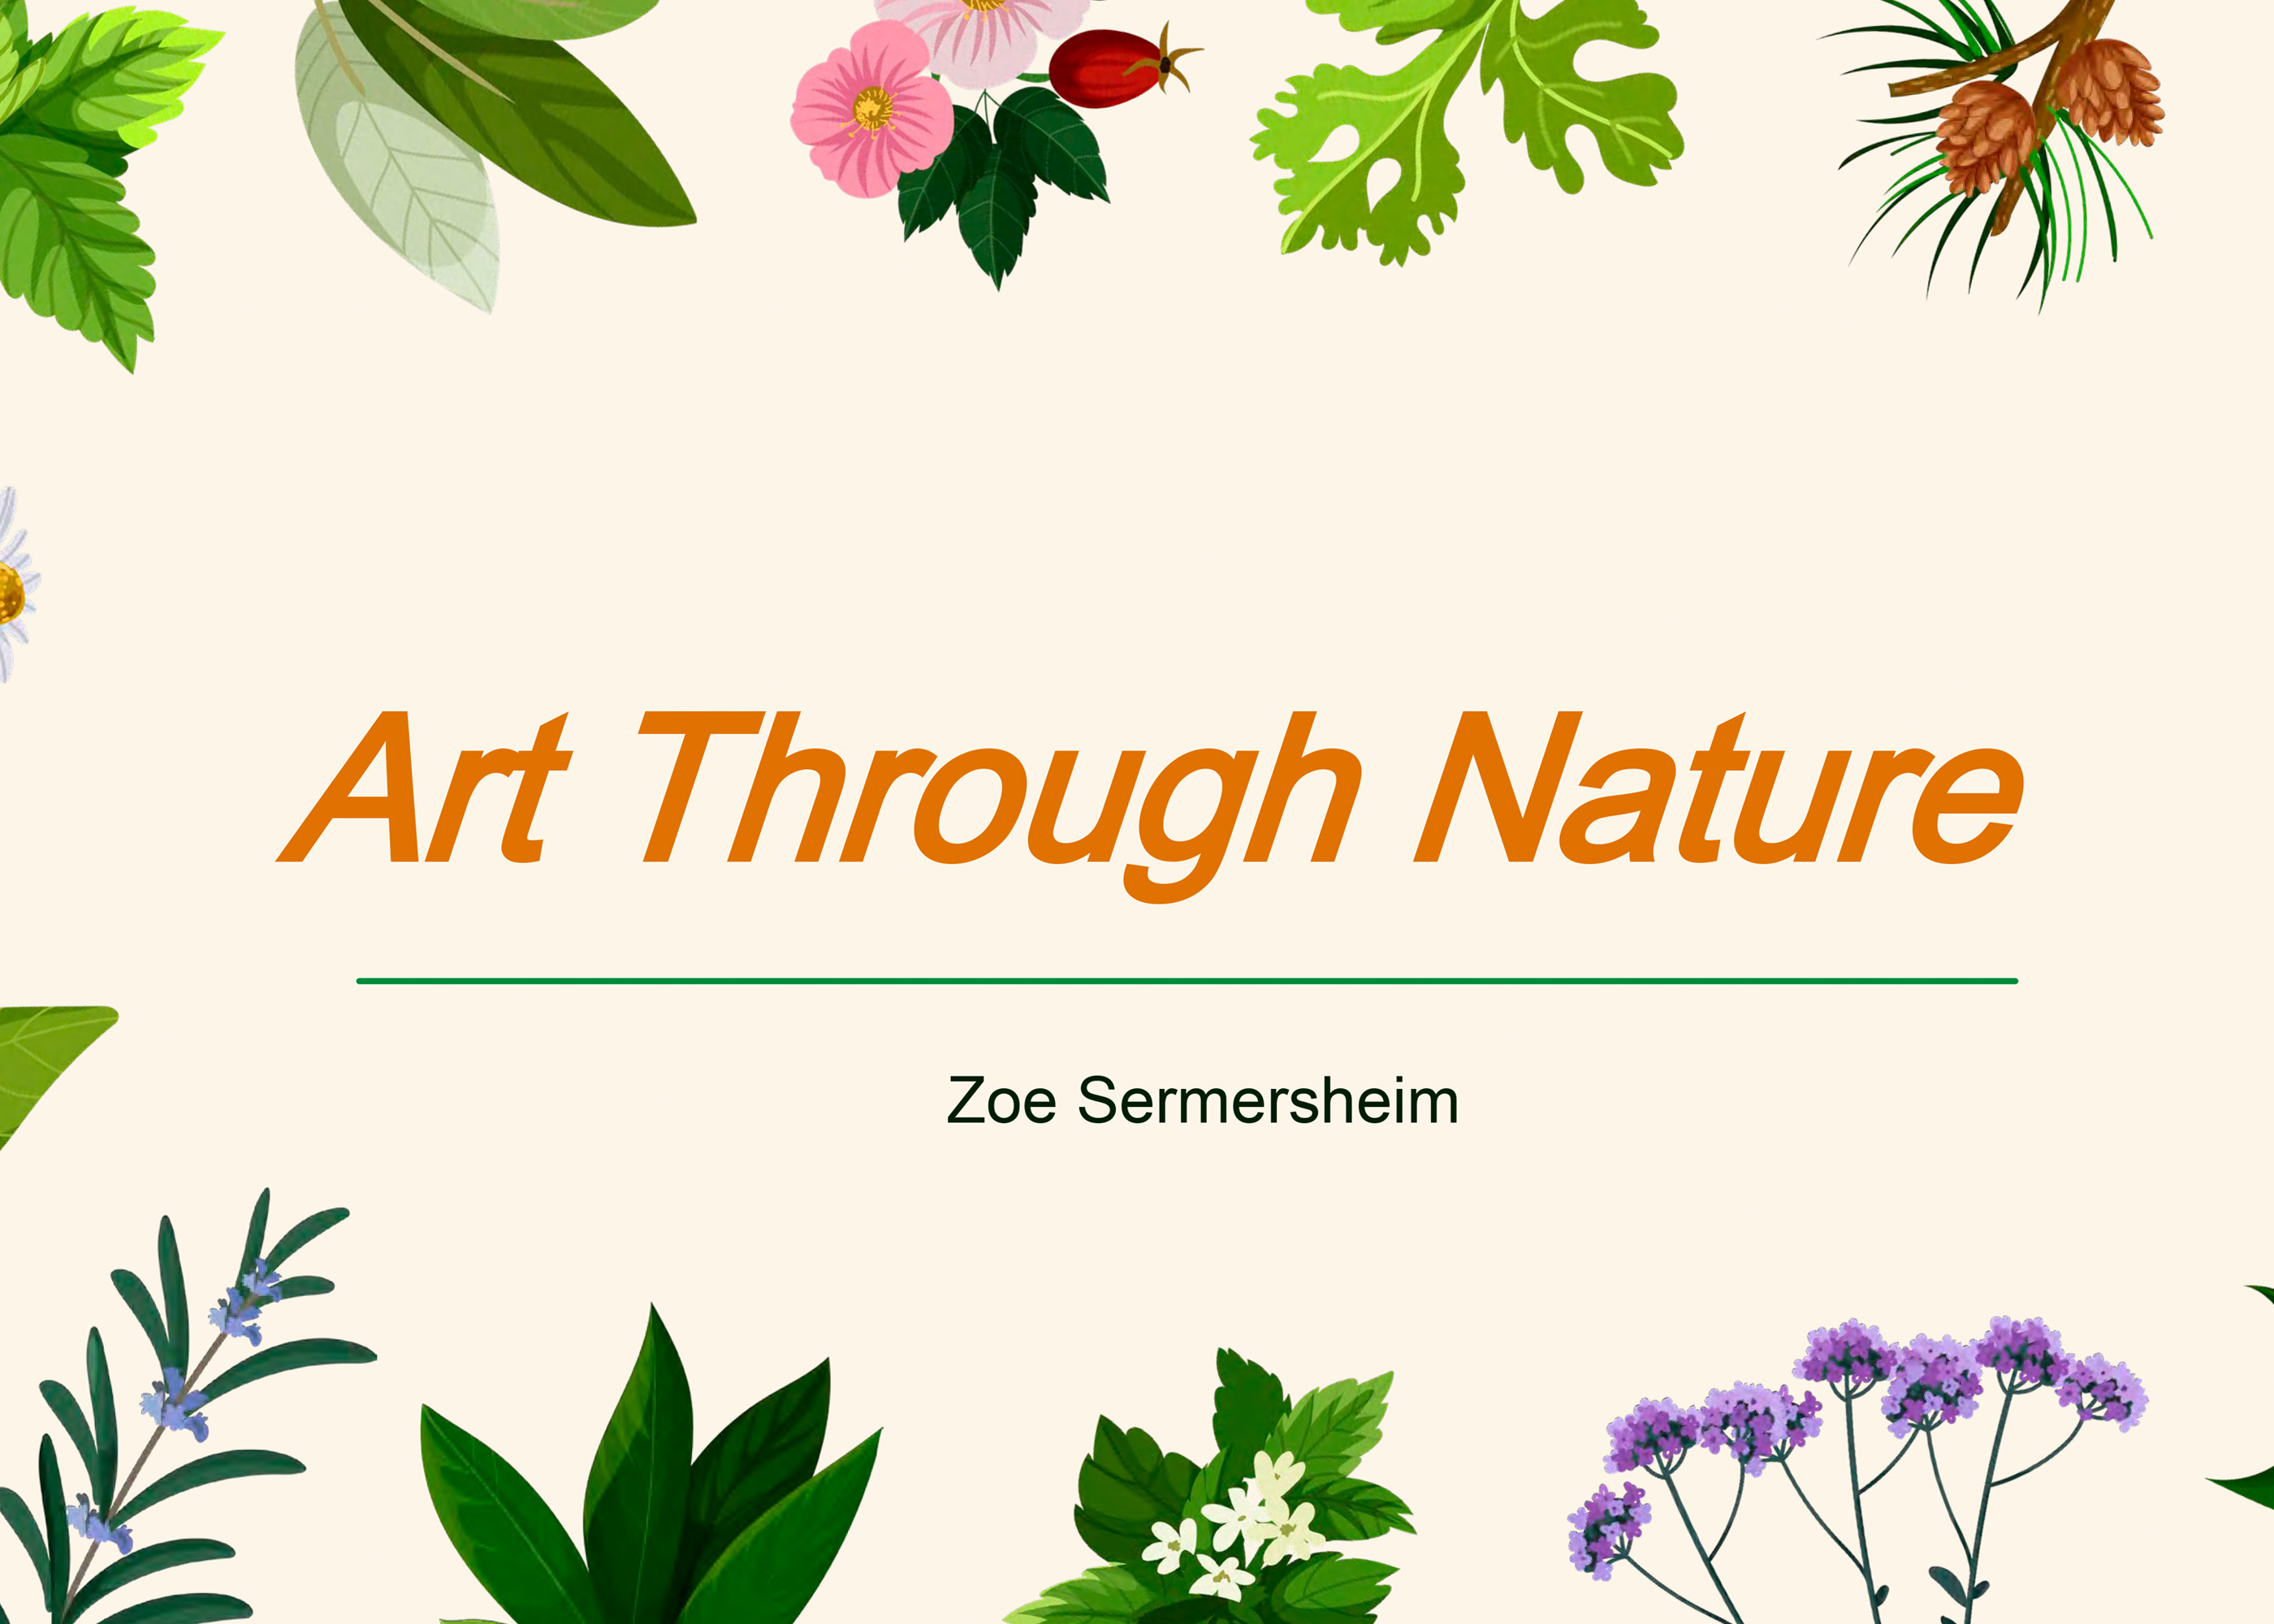 Cover image for student project titled Art Through Nature